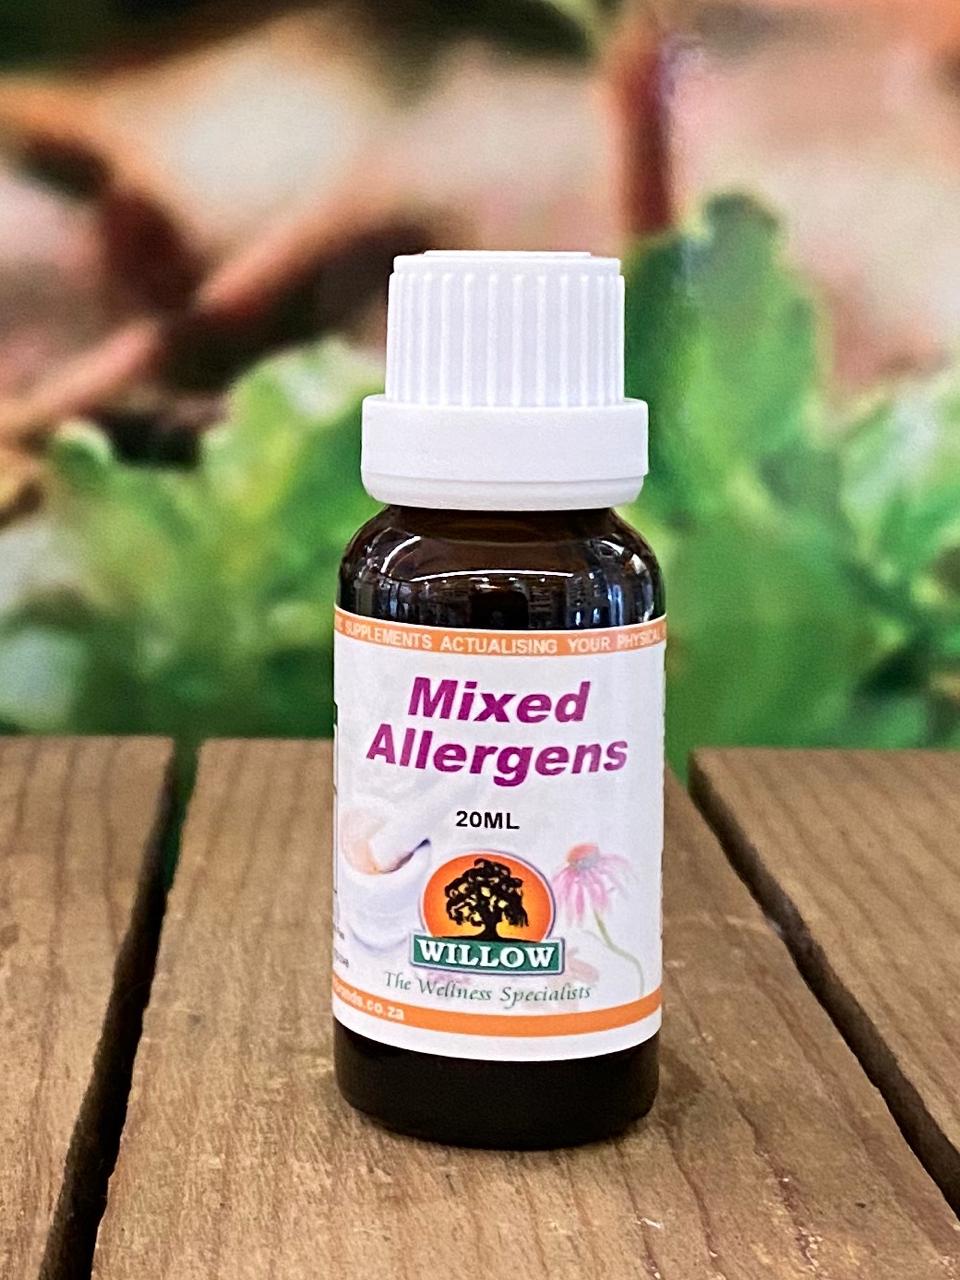 Willow Mixed Allergens drops 20ml